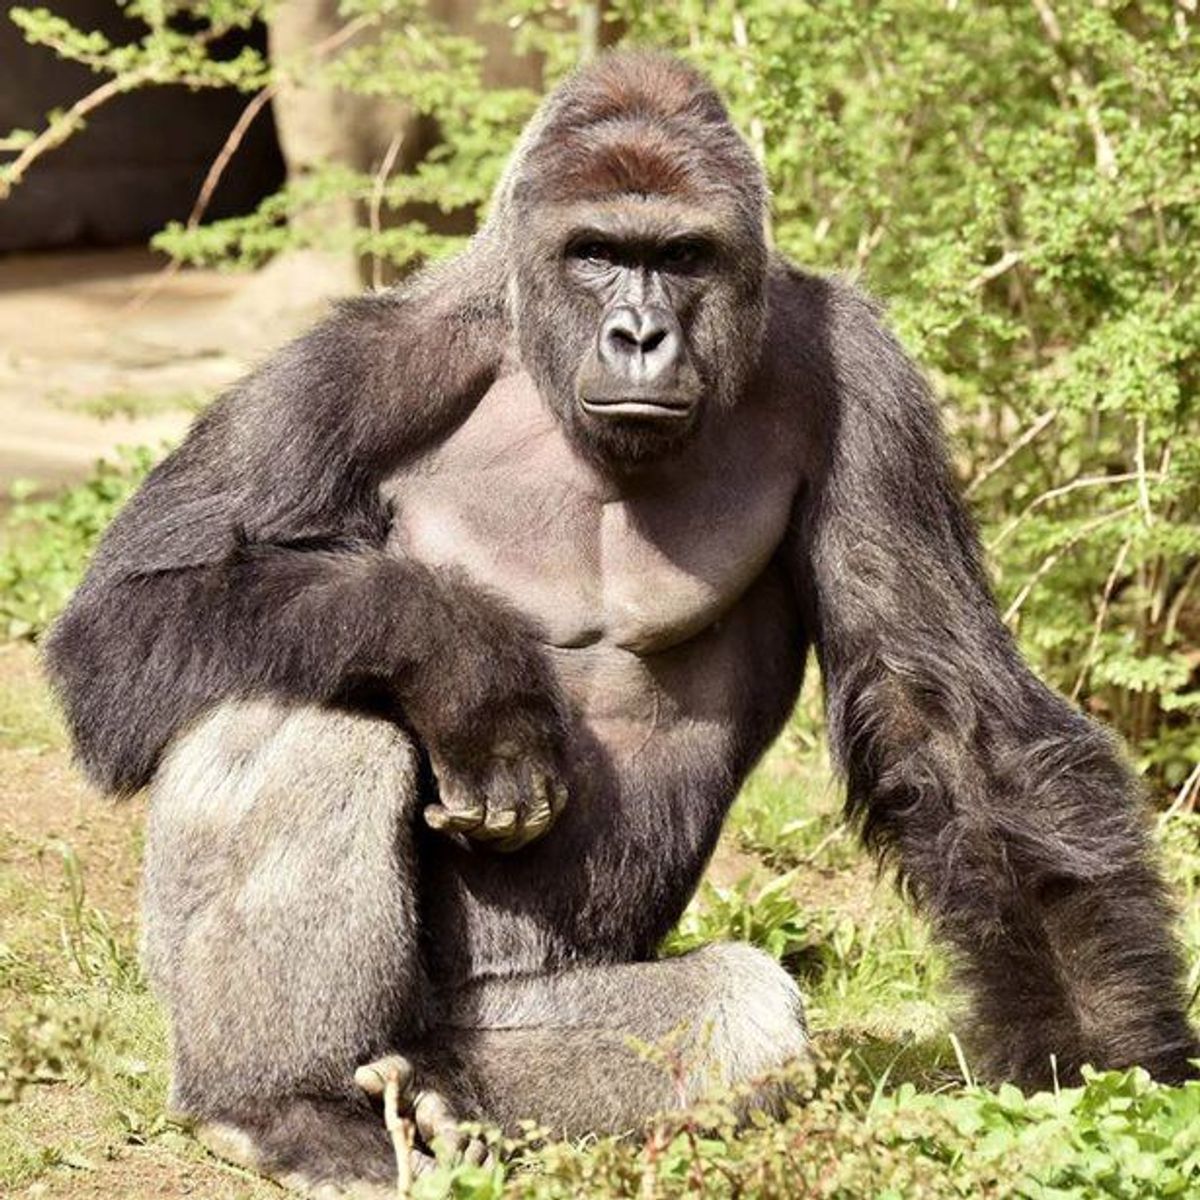 Harmbe's Death: Now Let's Talk About Blame And Zoos